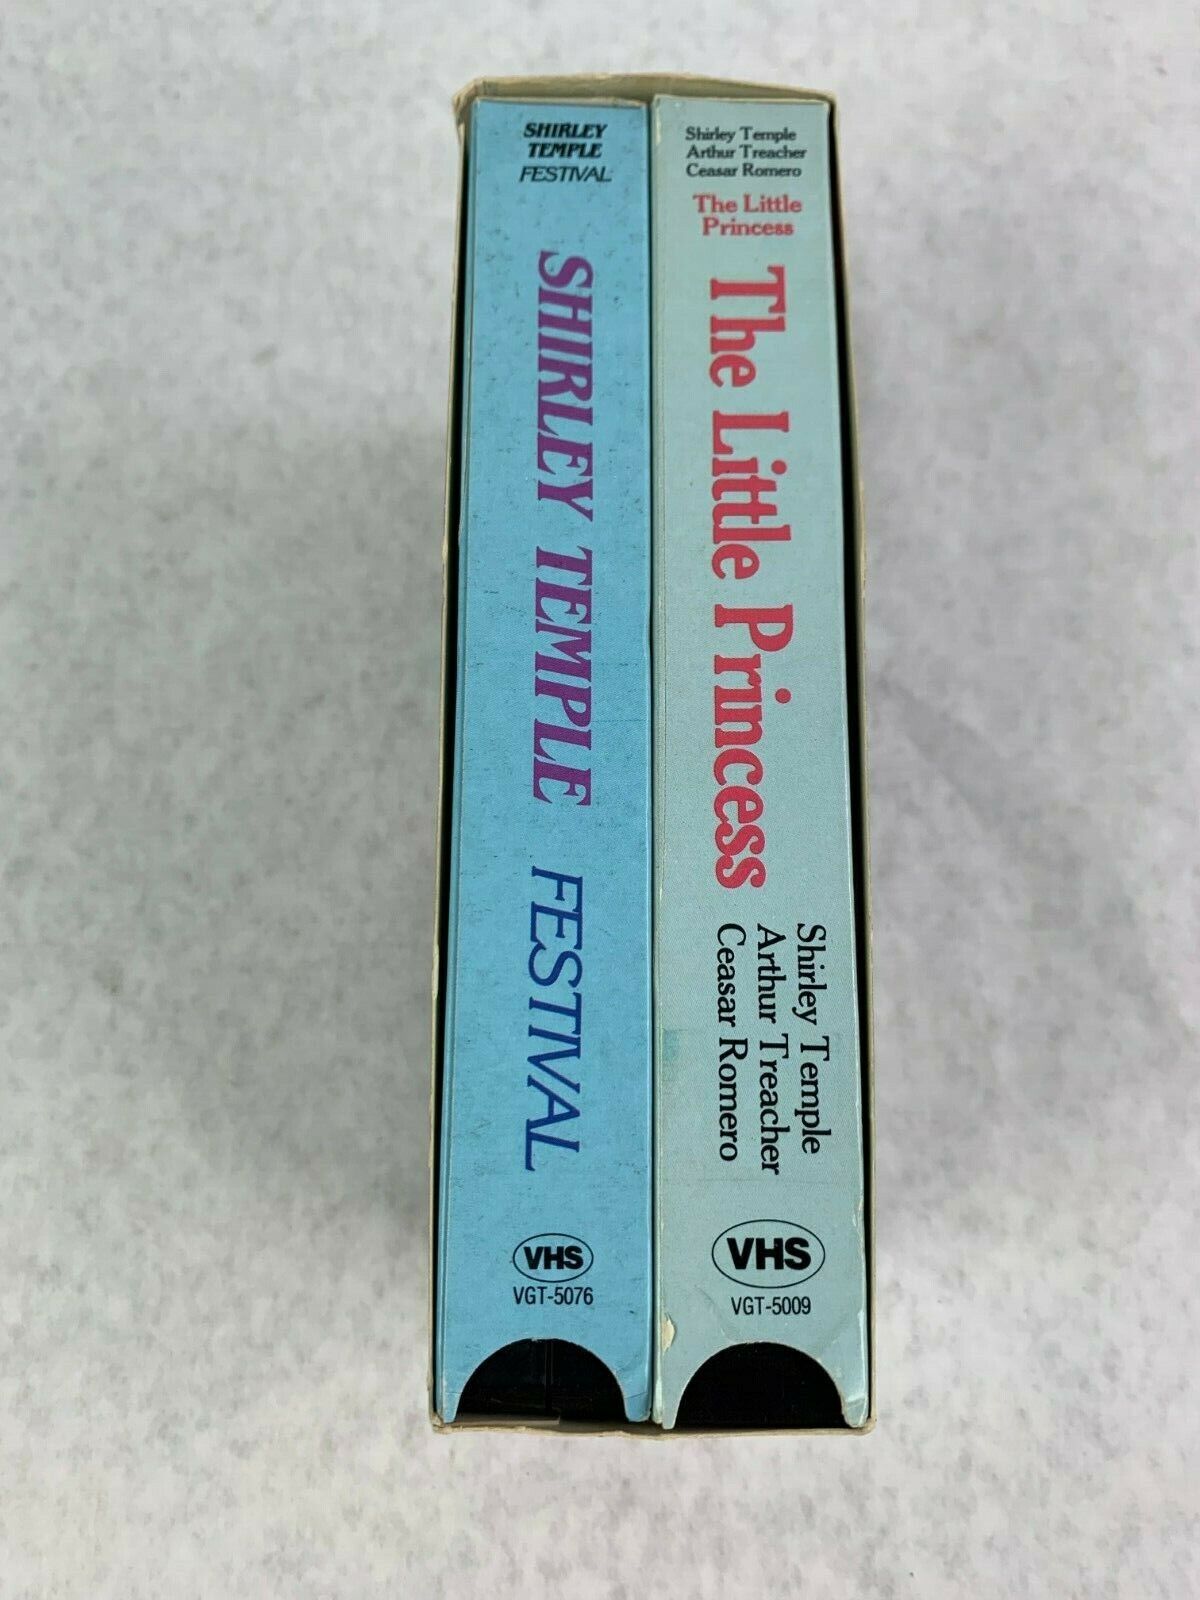 Vintage Shirley Temple In The Little Princess & Festival 2 Movie VHS Tape Set